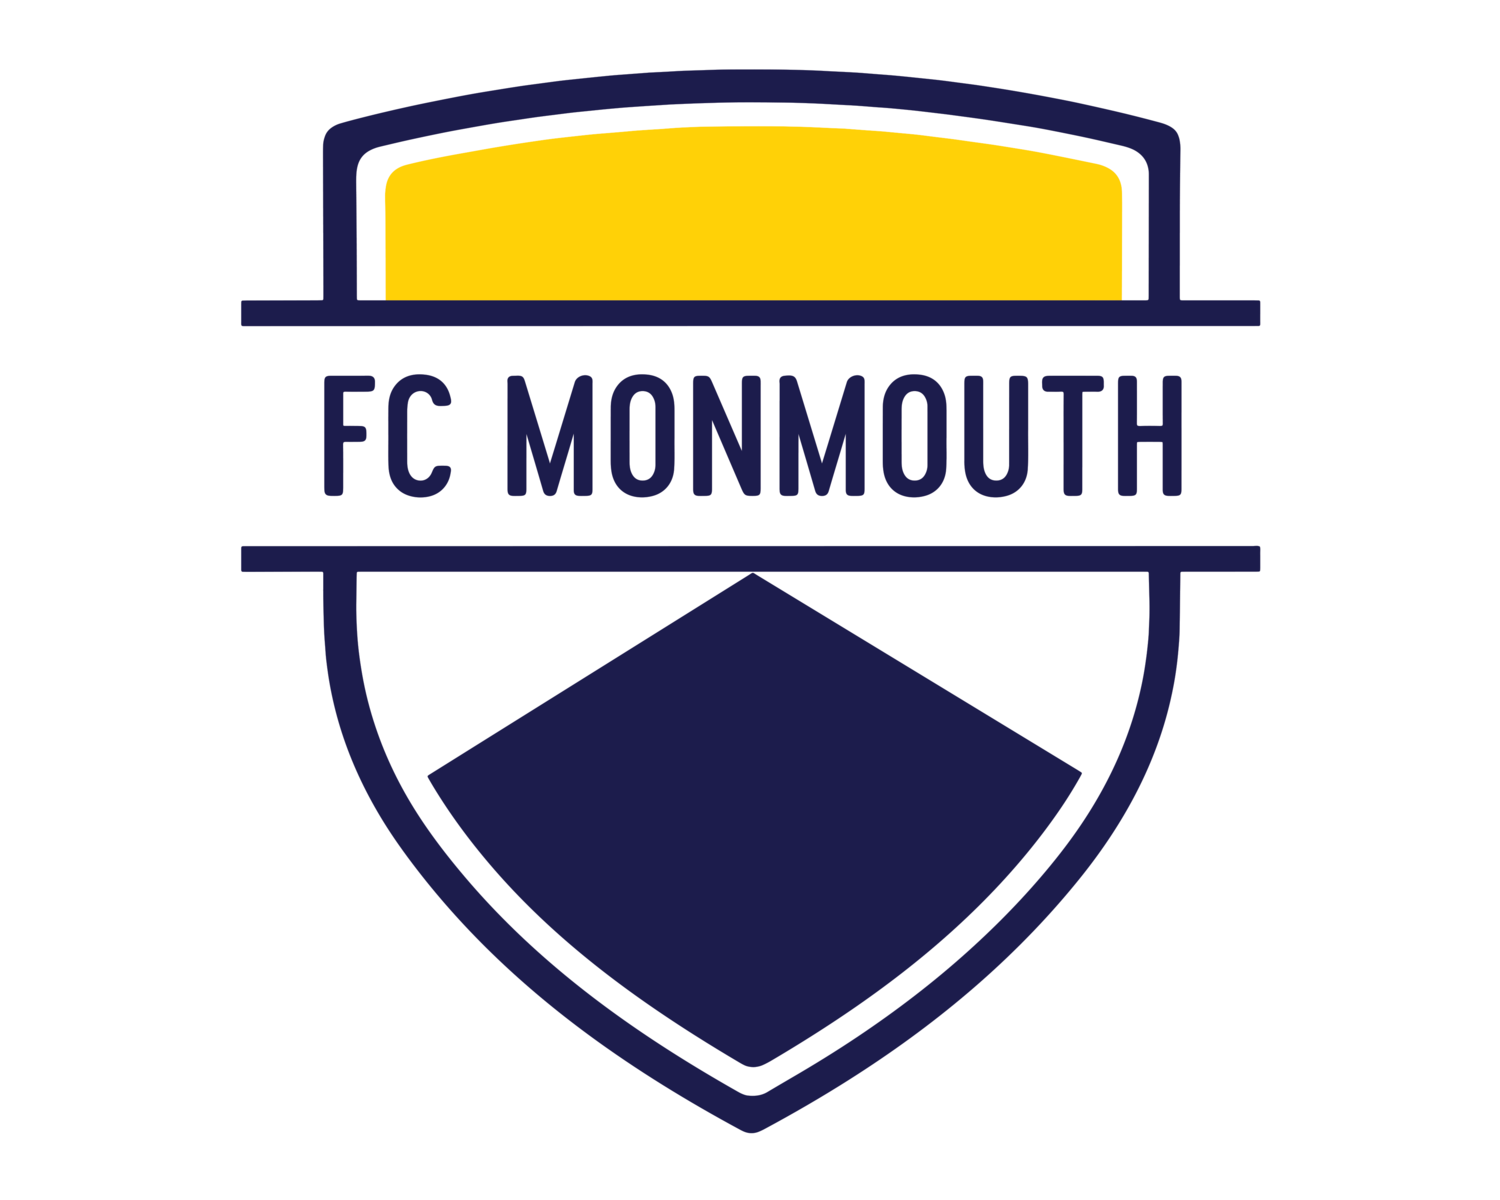 Fc Monmouth